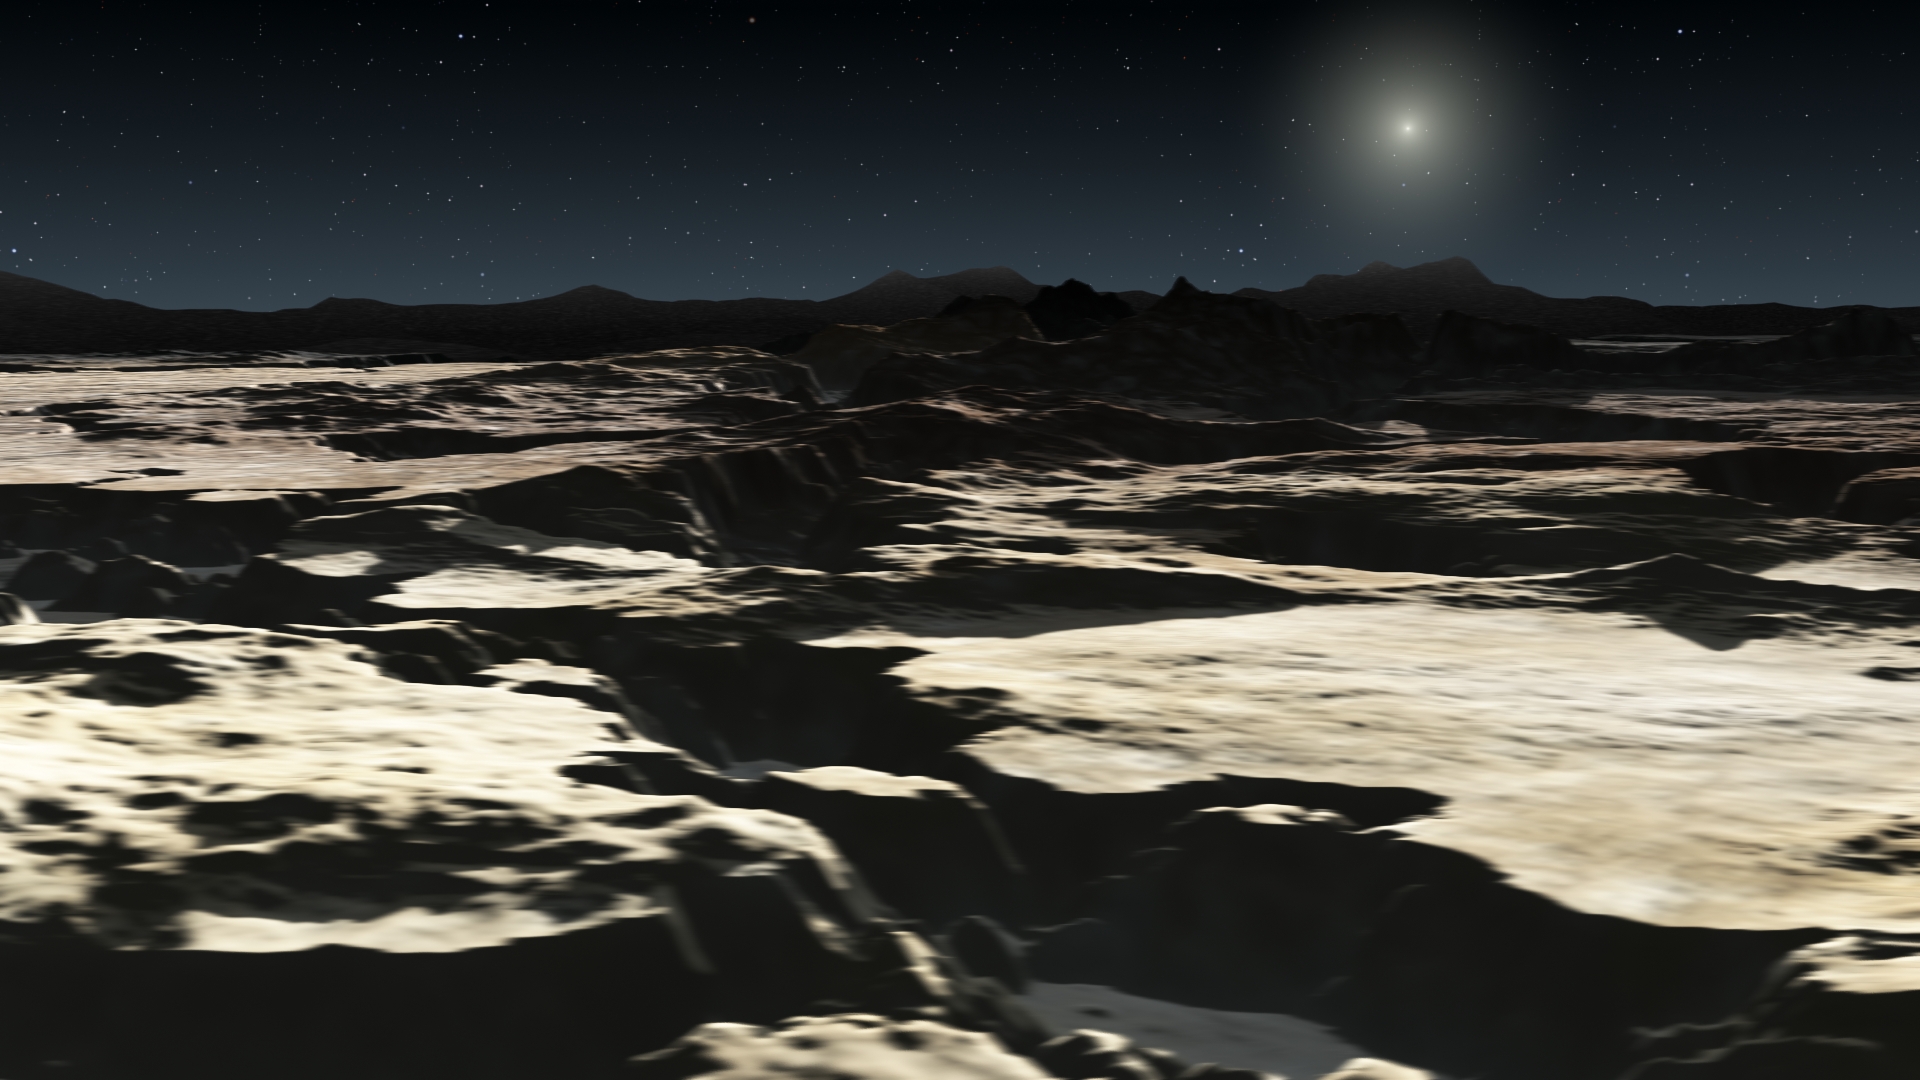 Destination Pluto Beyond the Flyby (3)